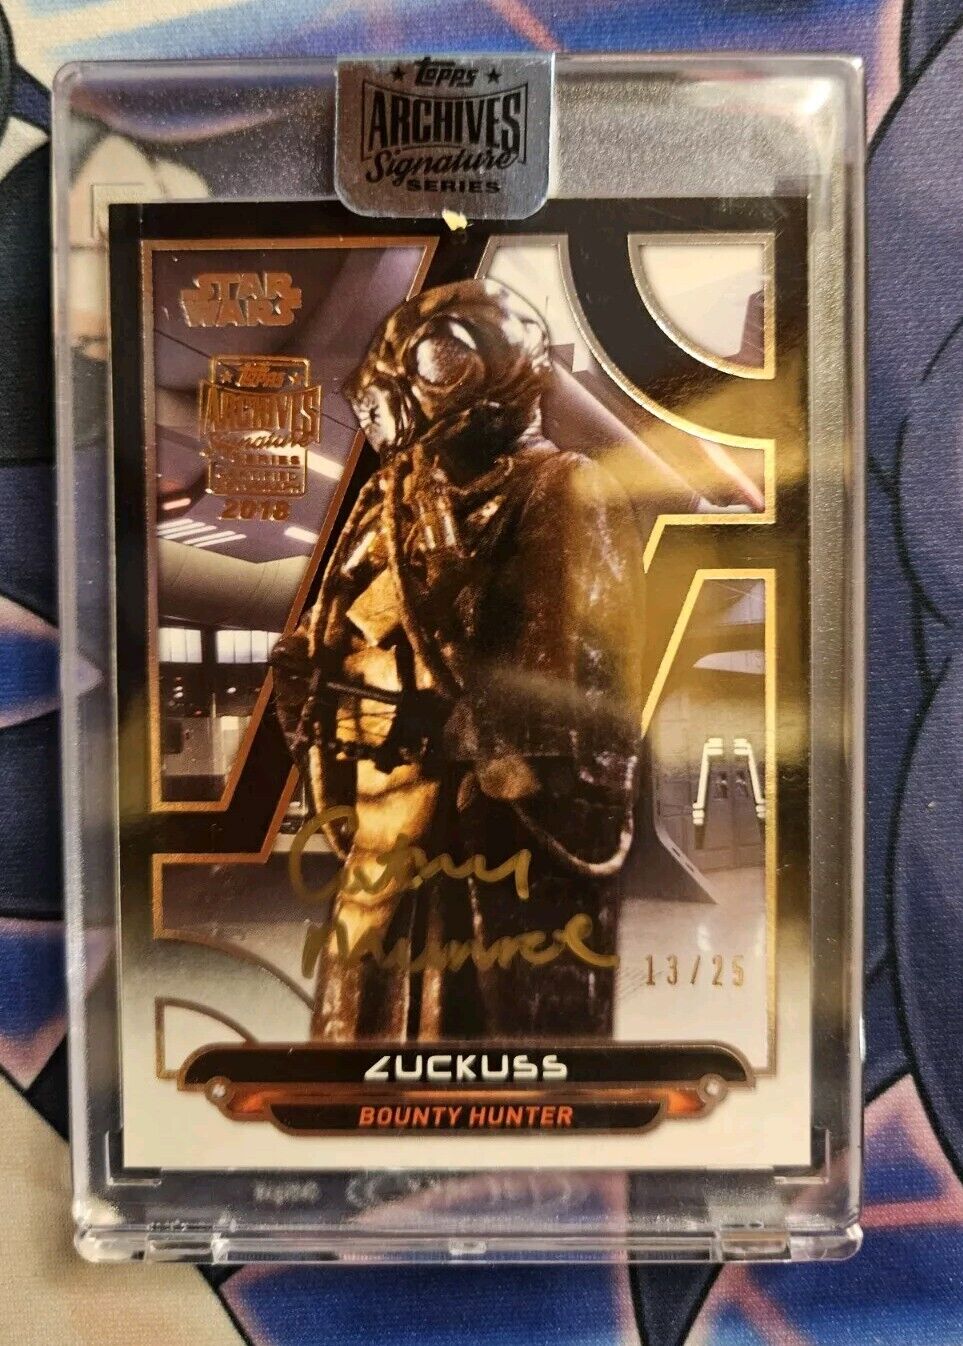 2018 Archives Signature Star Wars Topps Autograph Cathy Munroe Zuckuss #13/25 🔥